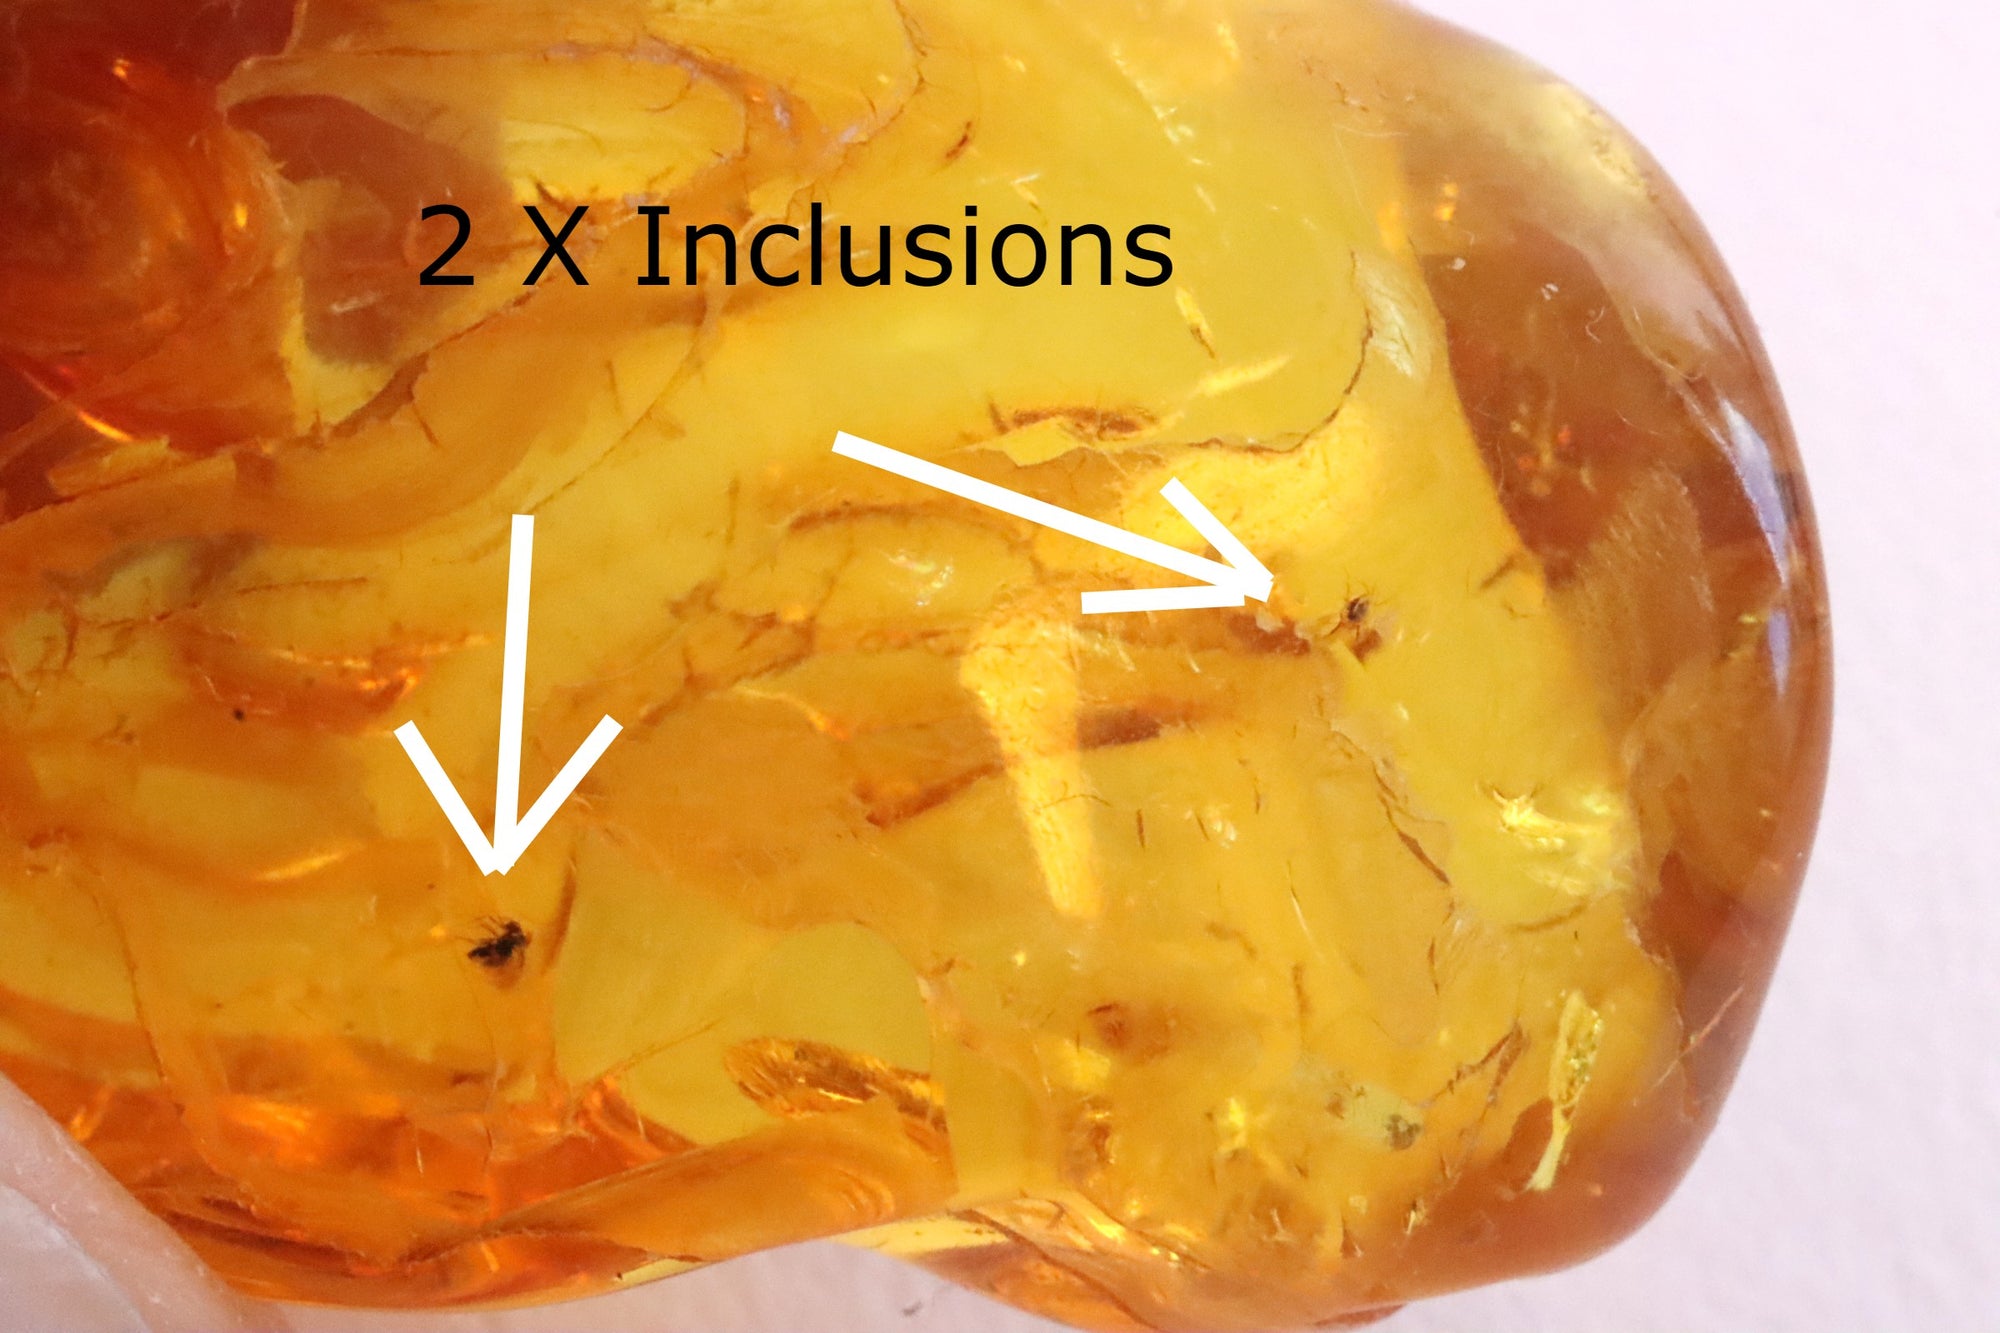 2 X Insect in Amber 40 million year old Inclusion